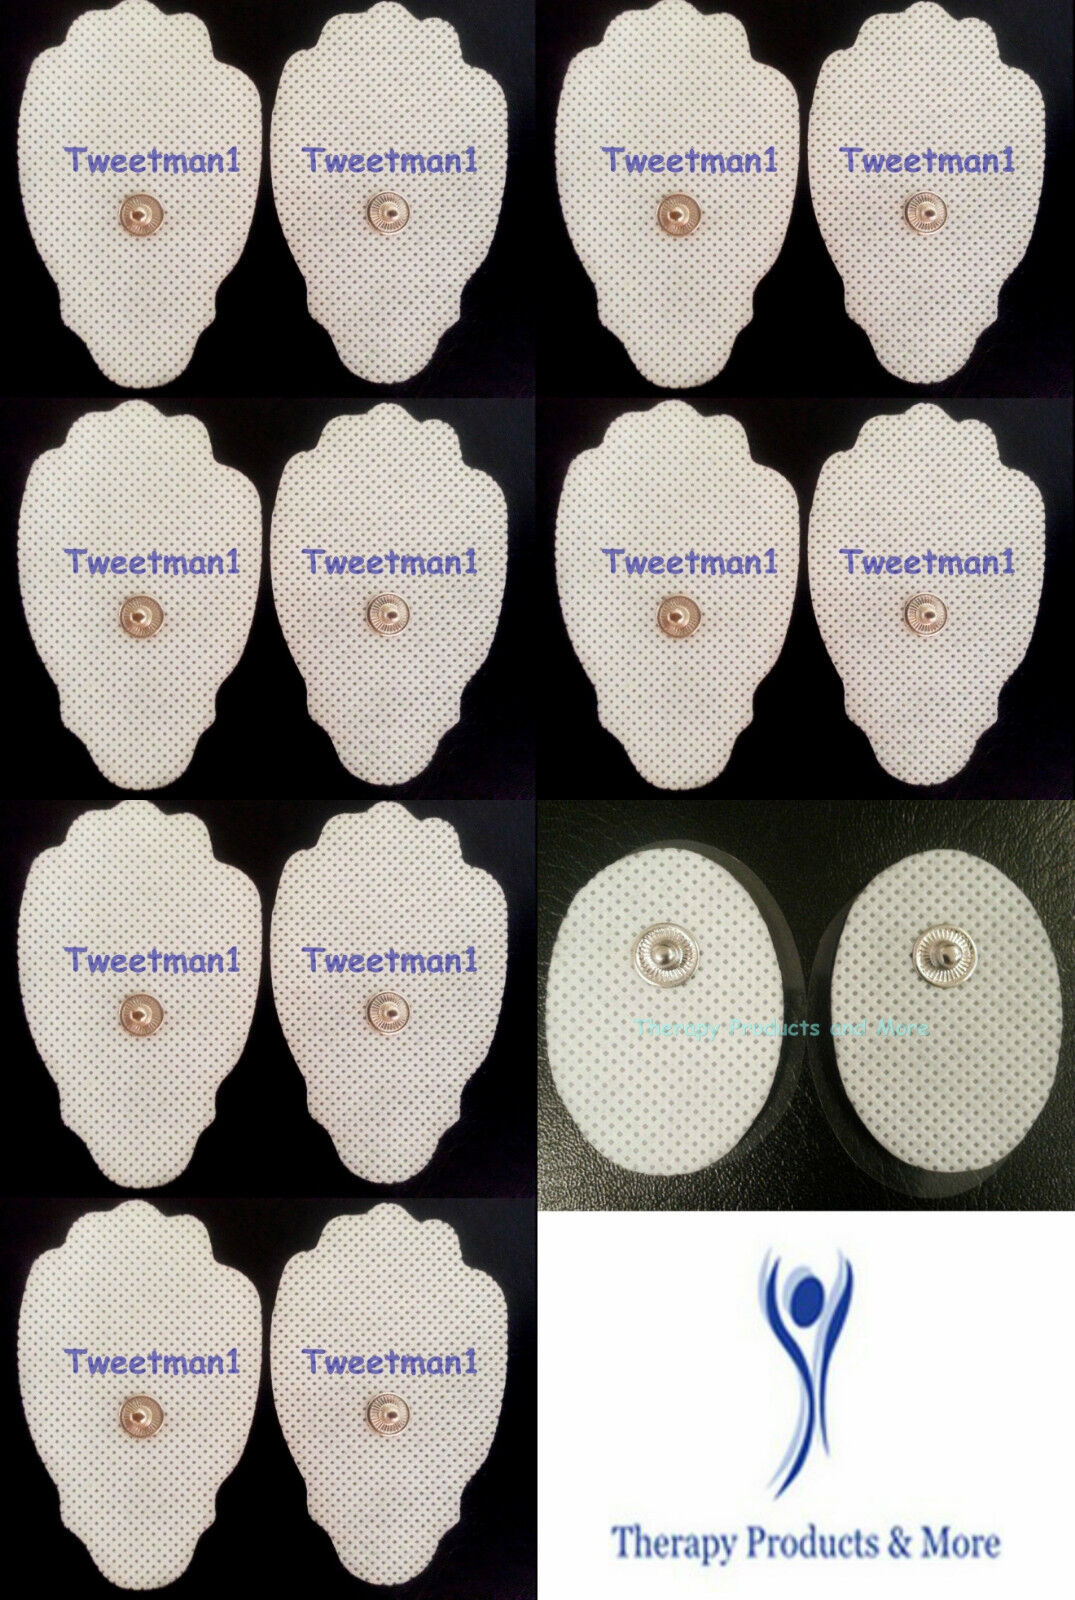 +BONUS 12 X REPLACEMENT ELECTRODE PADS LG for PINOOK MINI MASSAGER TENS EMS Unbranded does not apply